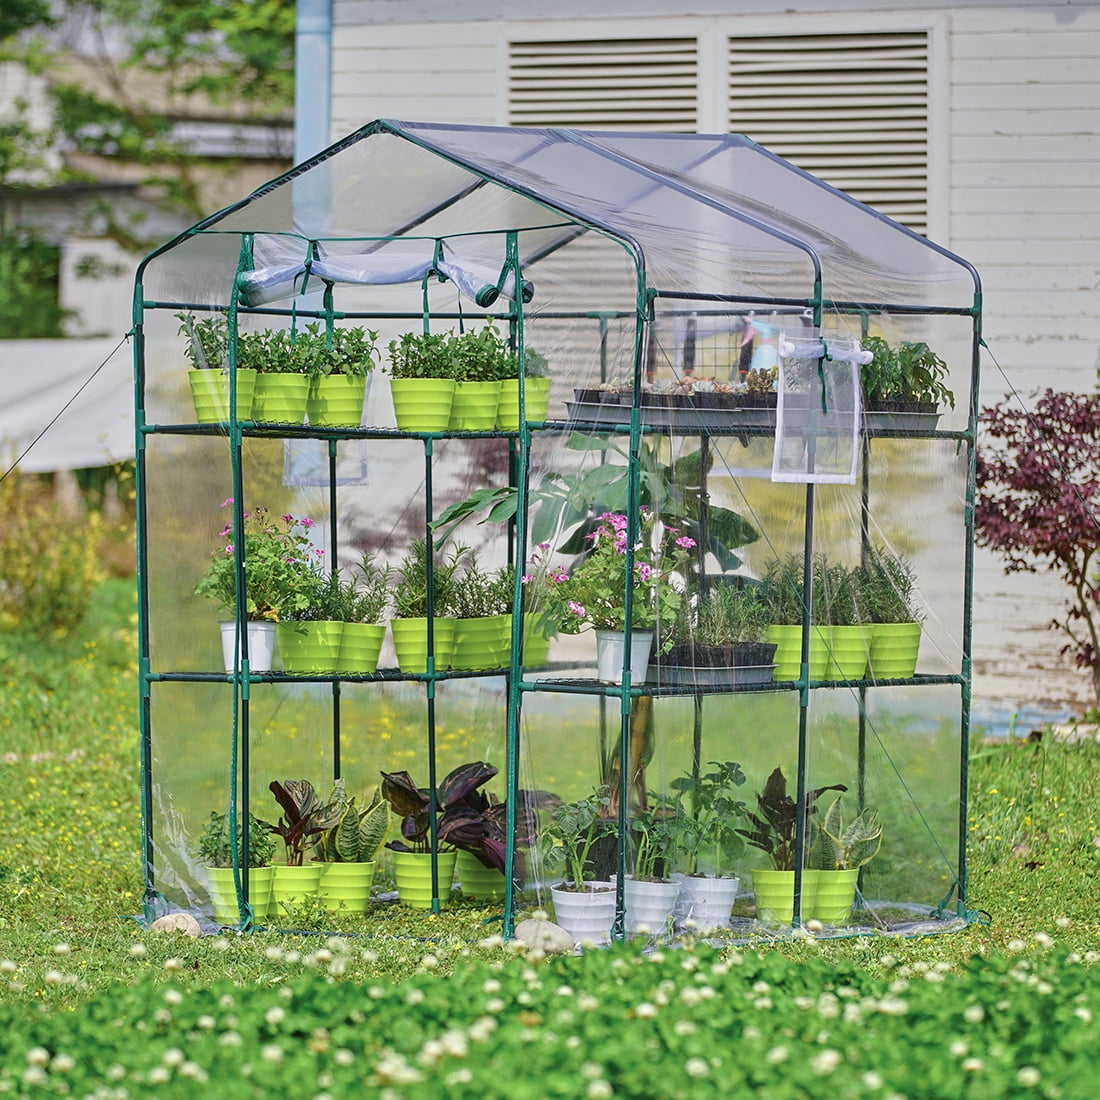 Quictent Greenhouse Mesh Door 3 Windows 3 Tiers 12 Shelves 56 W x 56 D x 77 H Walk in Outdoor Portable Plant Garden Green House 50 T-Type Plant Tags 10 Stakes 4 Ropes Include Clear 